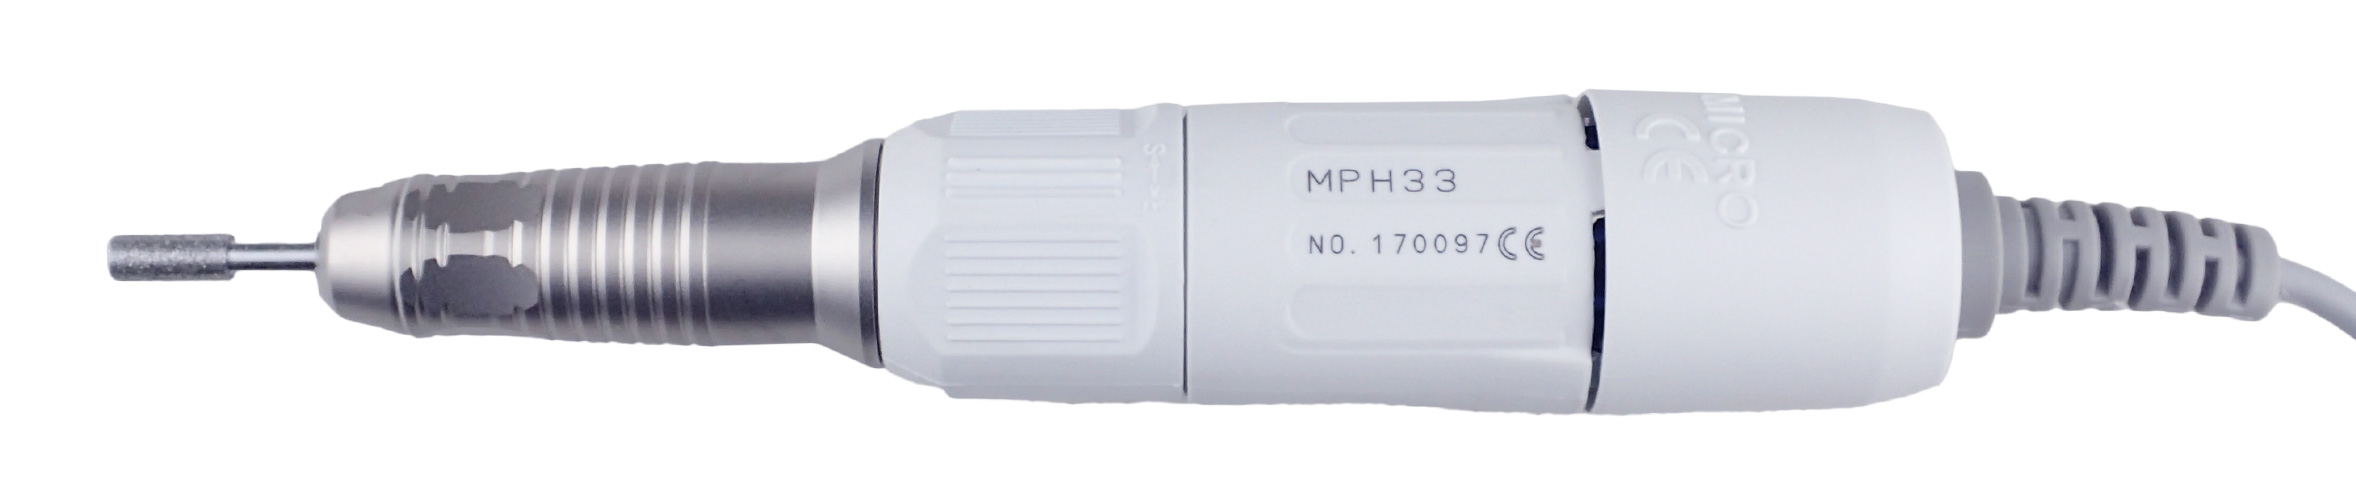 Mobile motor hand piece / MPH33